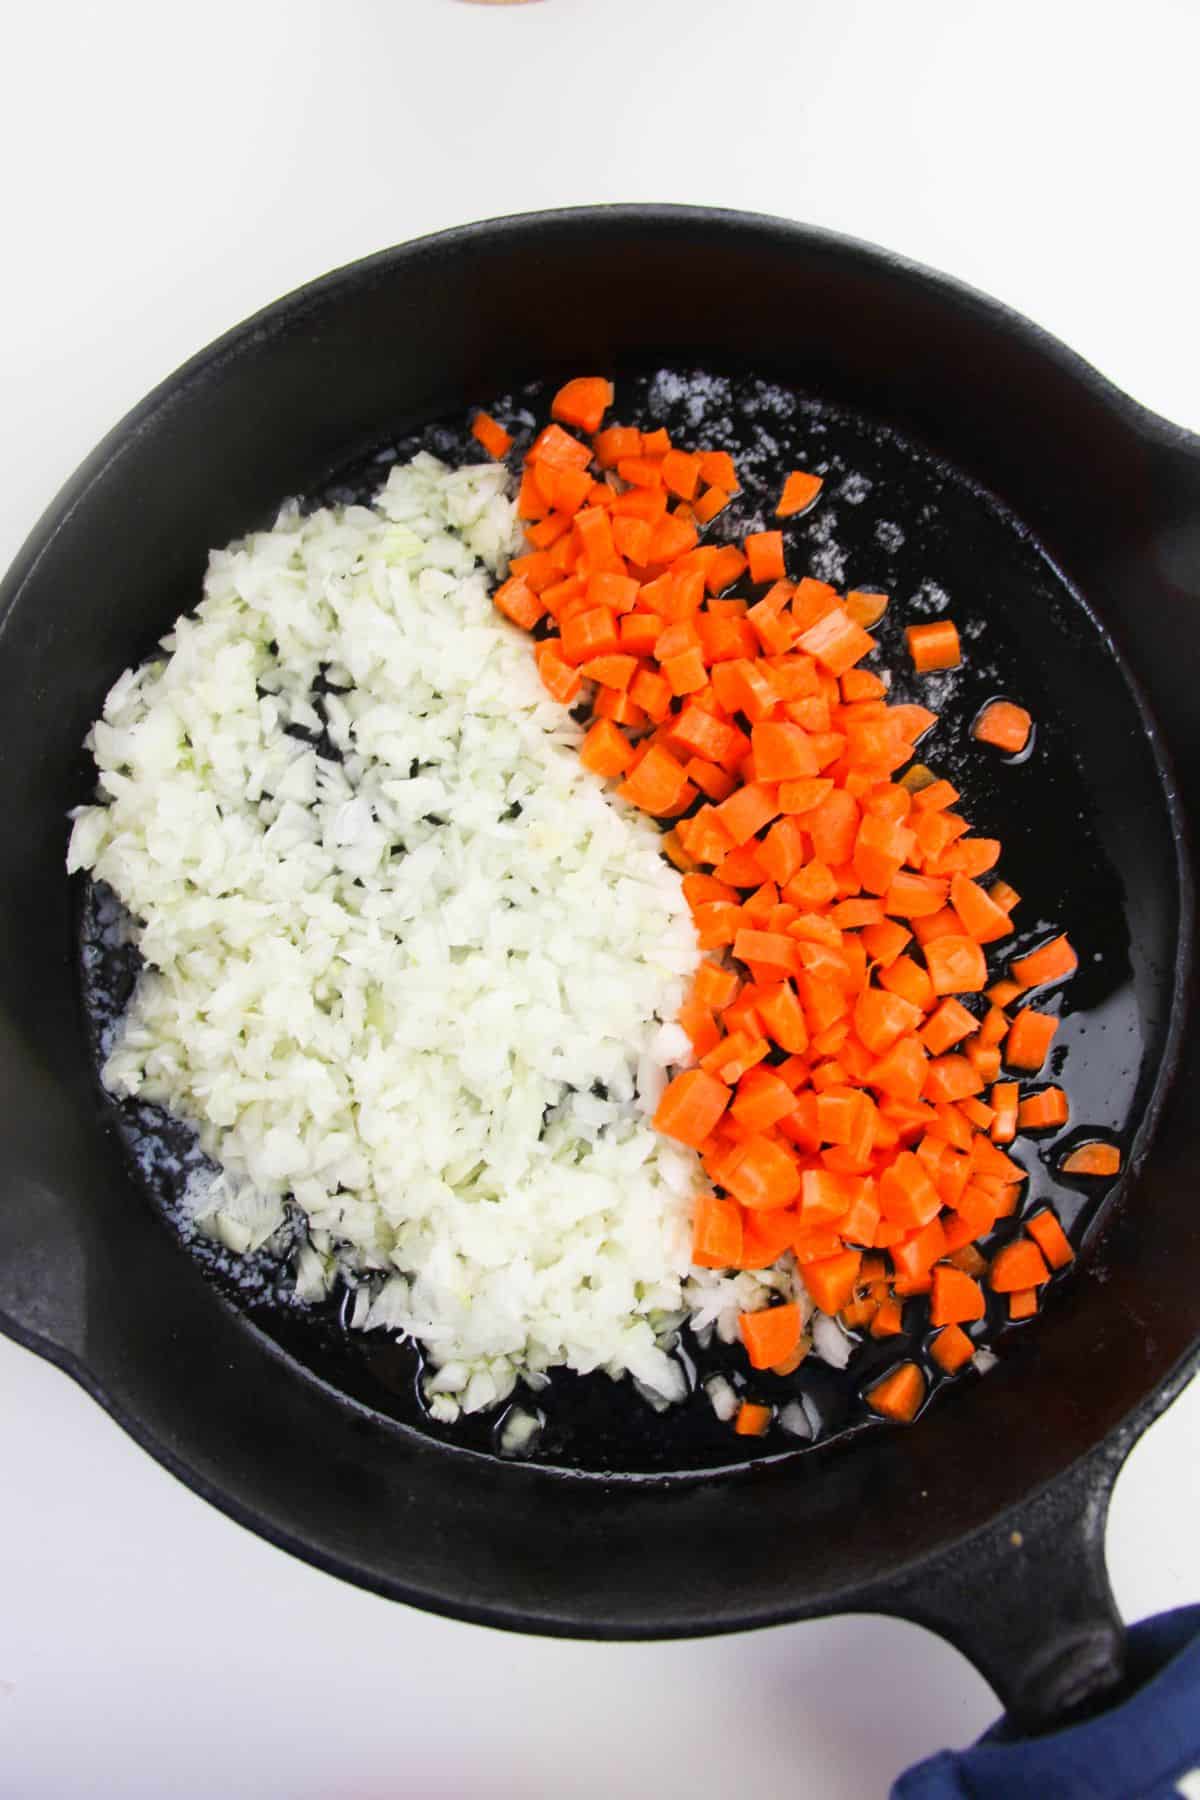 Onion and carrots in a skillet.